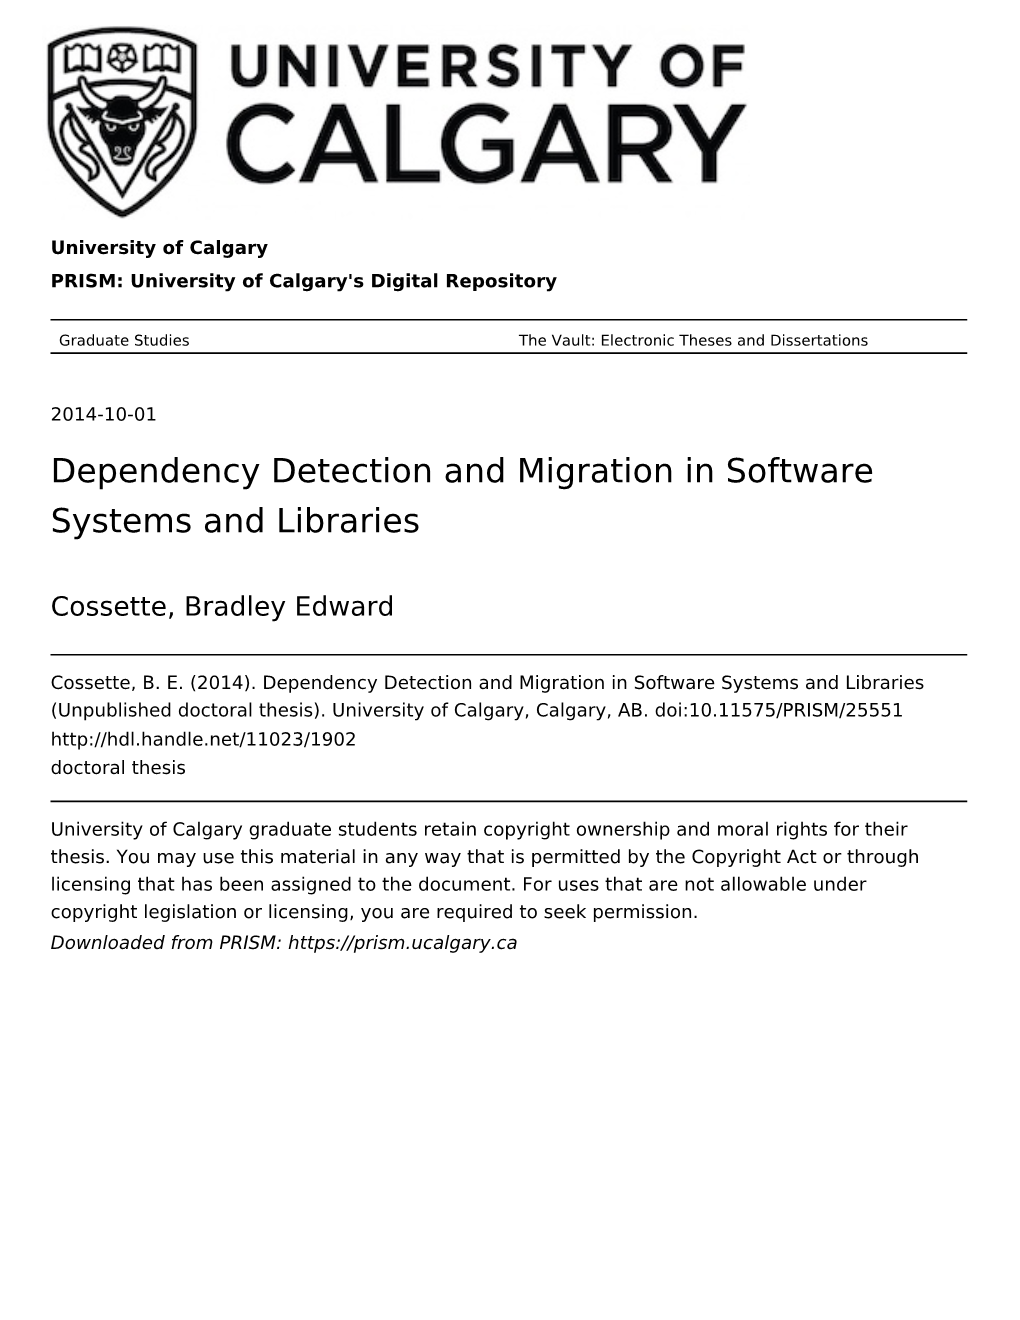 Dependency Detection and Migration in Software Systems and Libraries